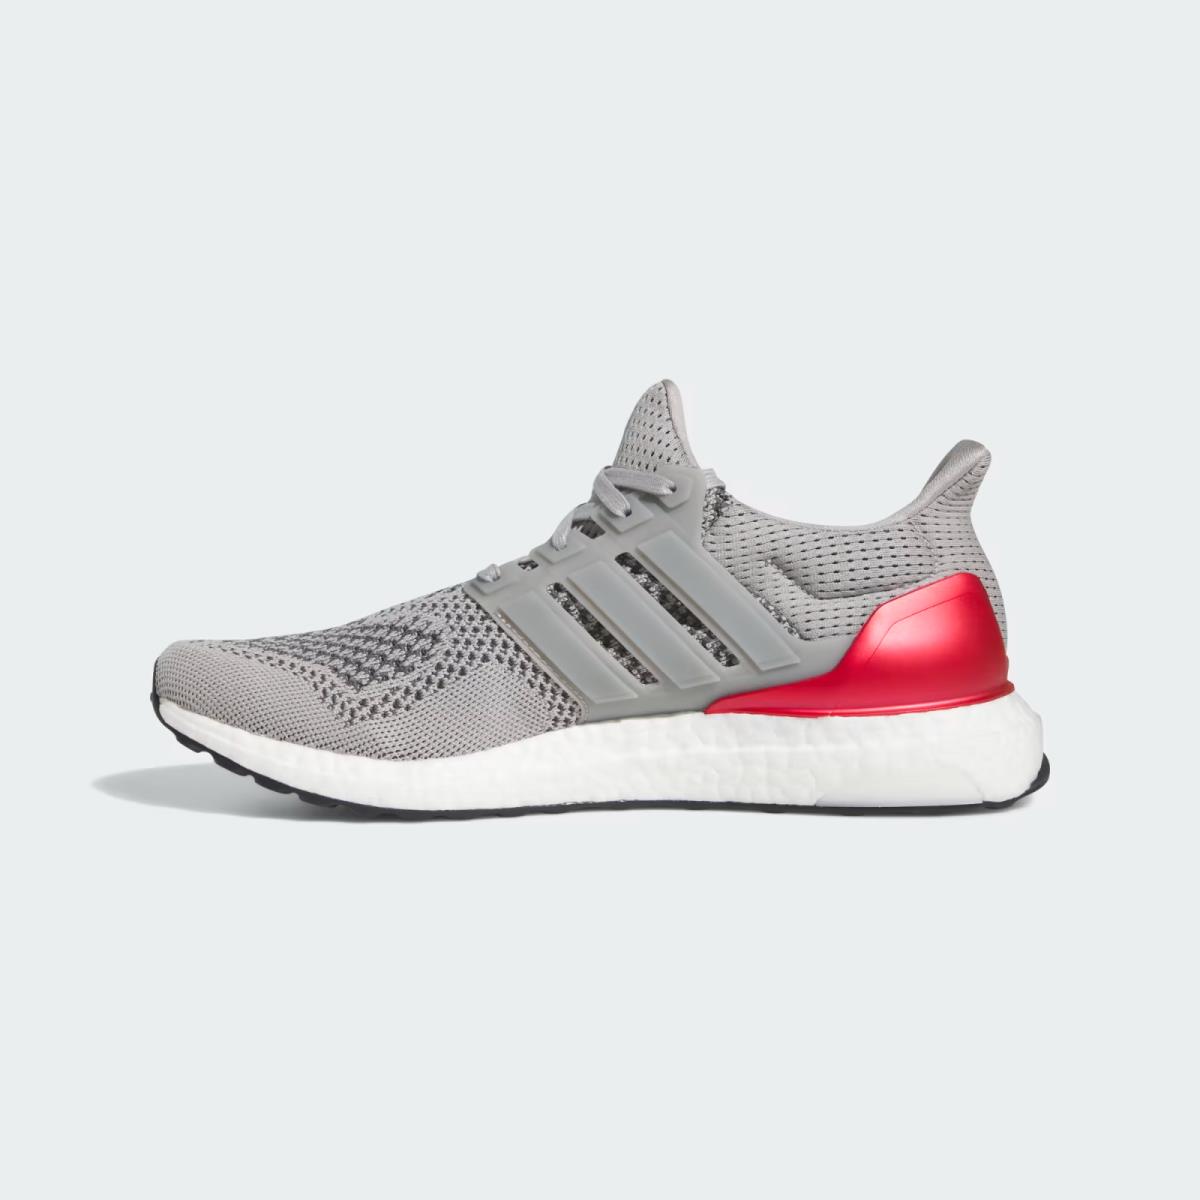 Adidas shoes UltraBoost - Gray 2